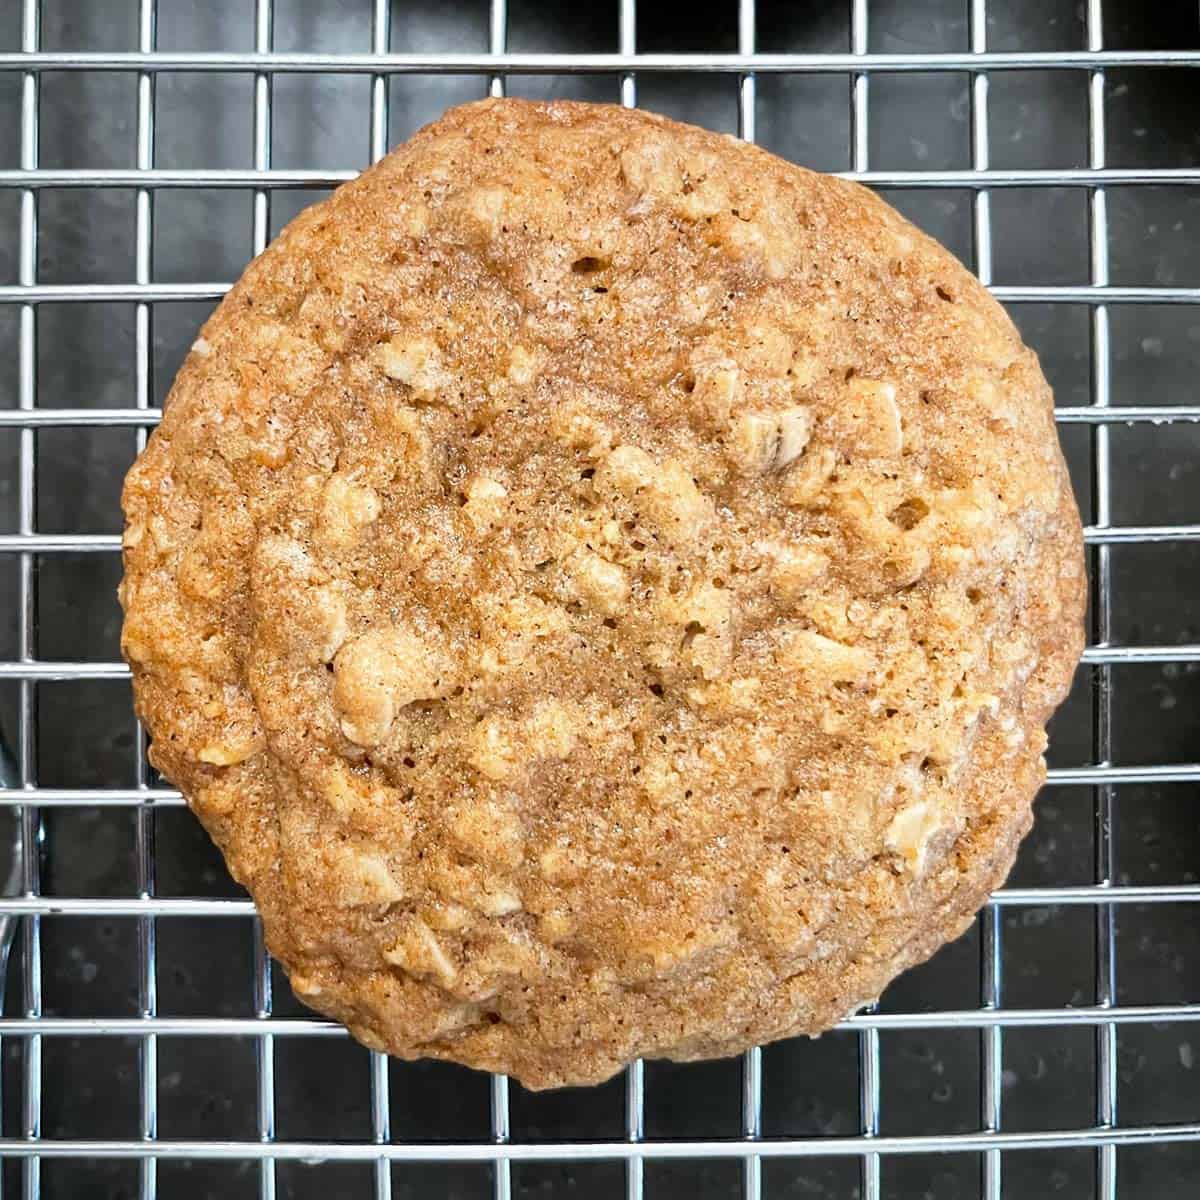 Single uniced maple oatmeal cookie sitting on a cooling rack.